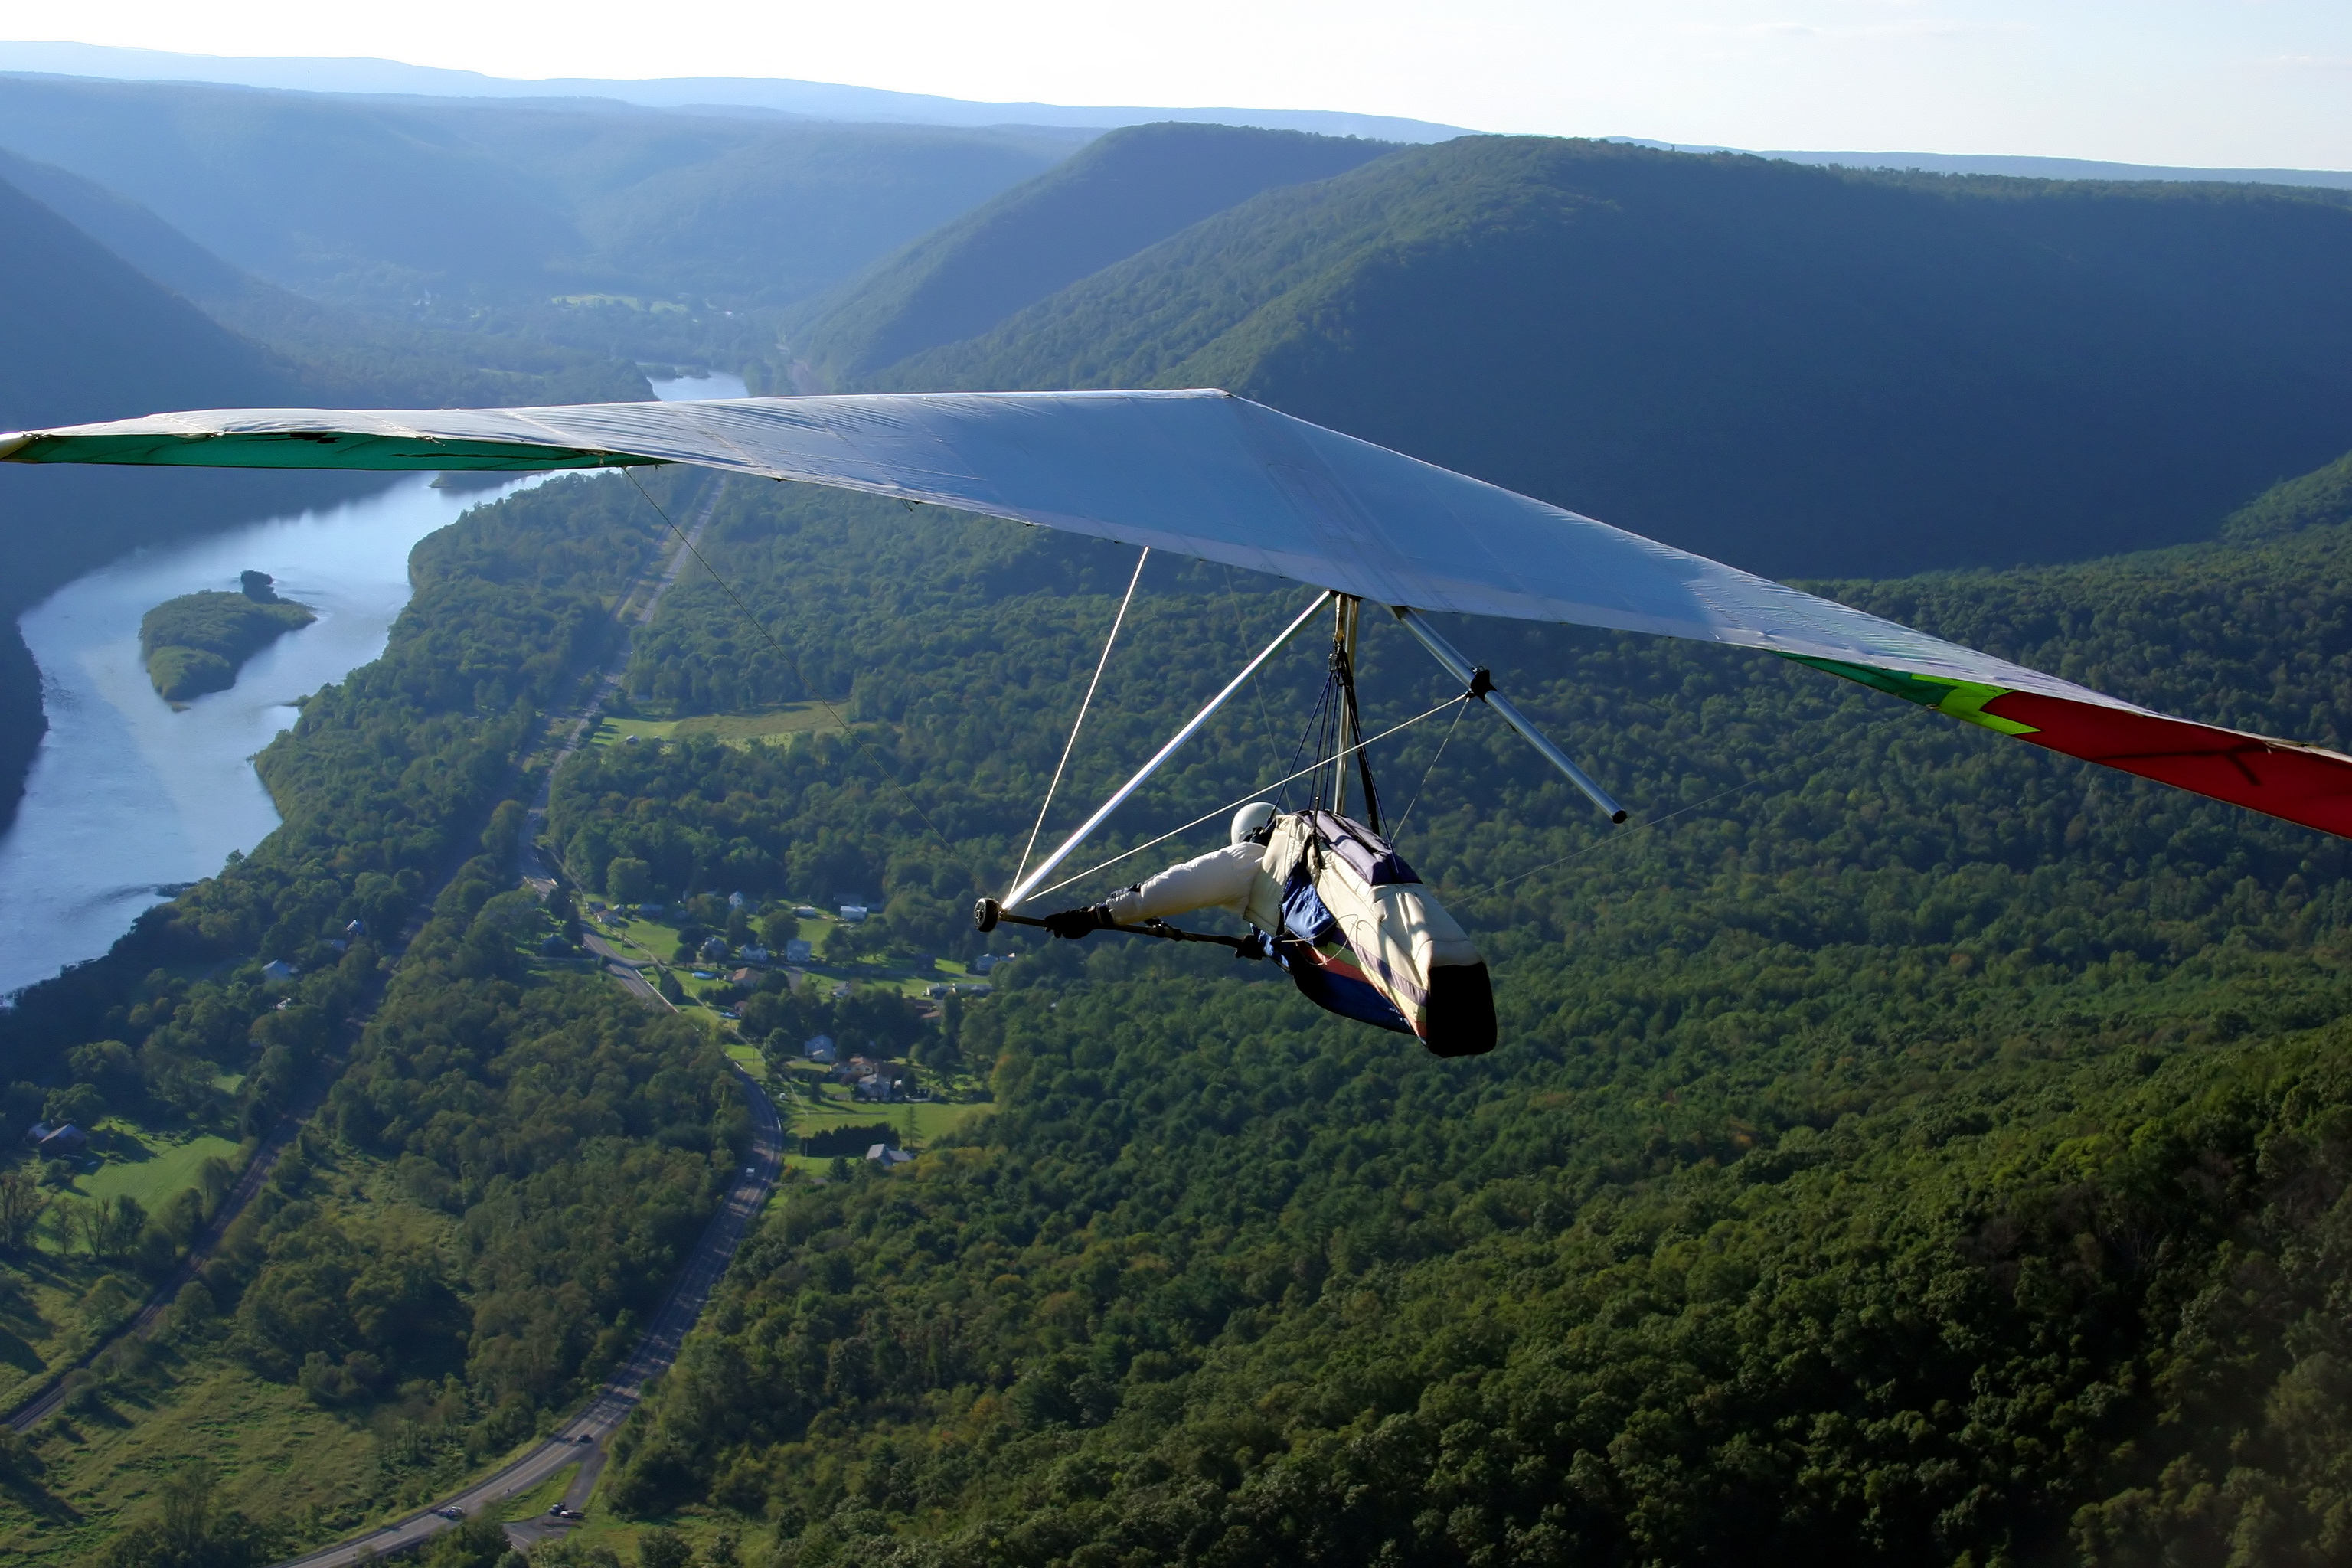 Hang Gliding: Soaring high above beautiful valley, Flying like a bird. 3080x2050 HD Background.